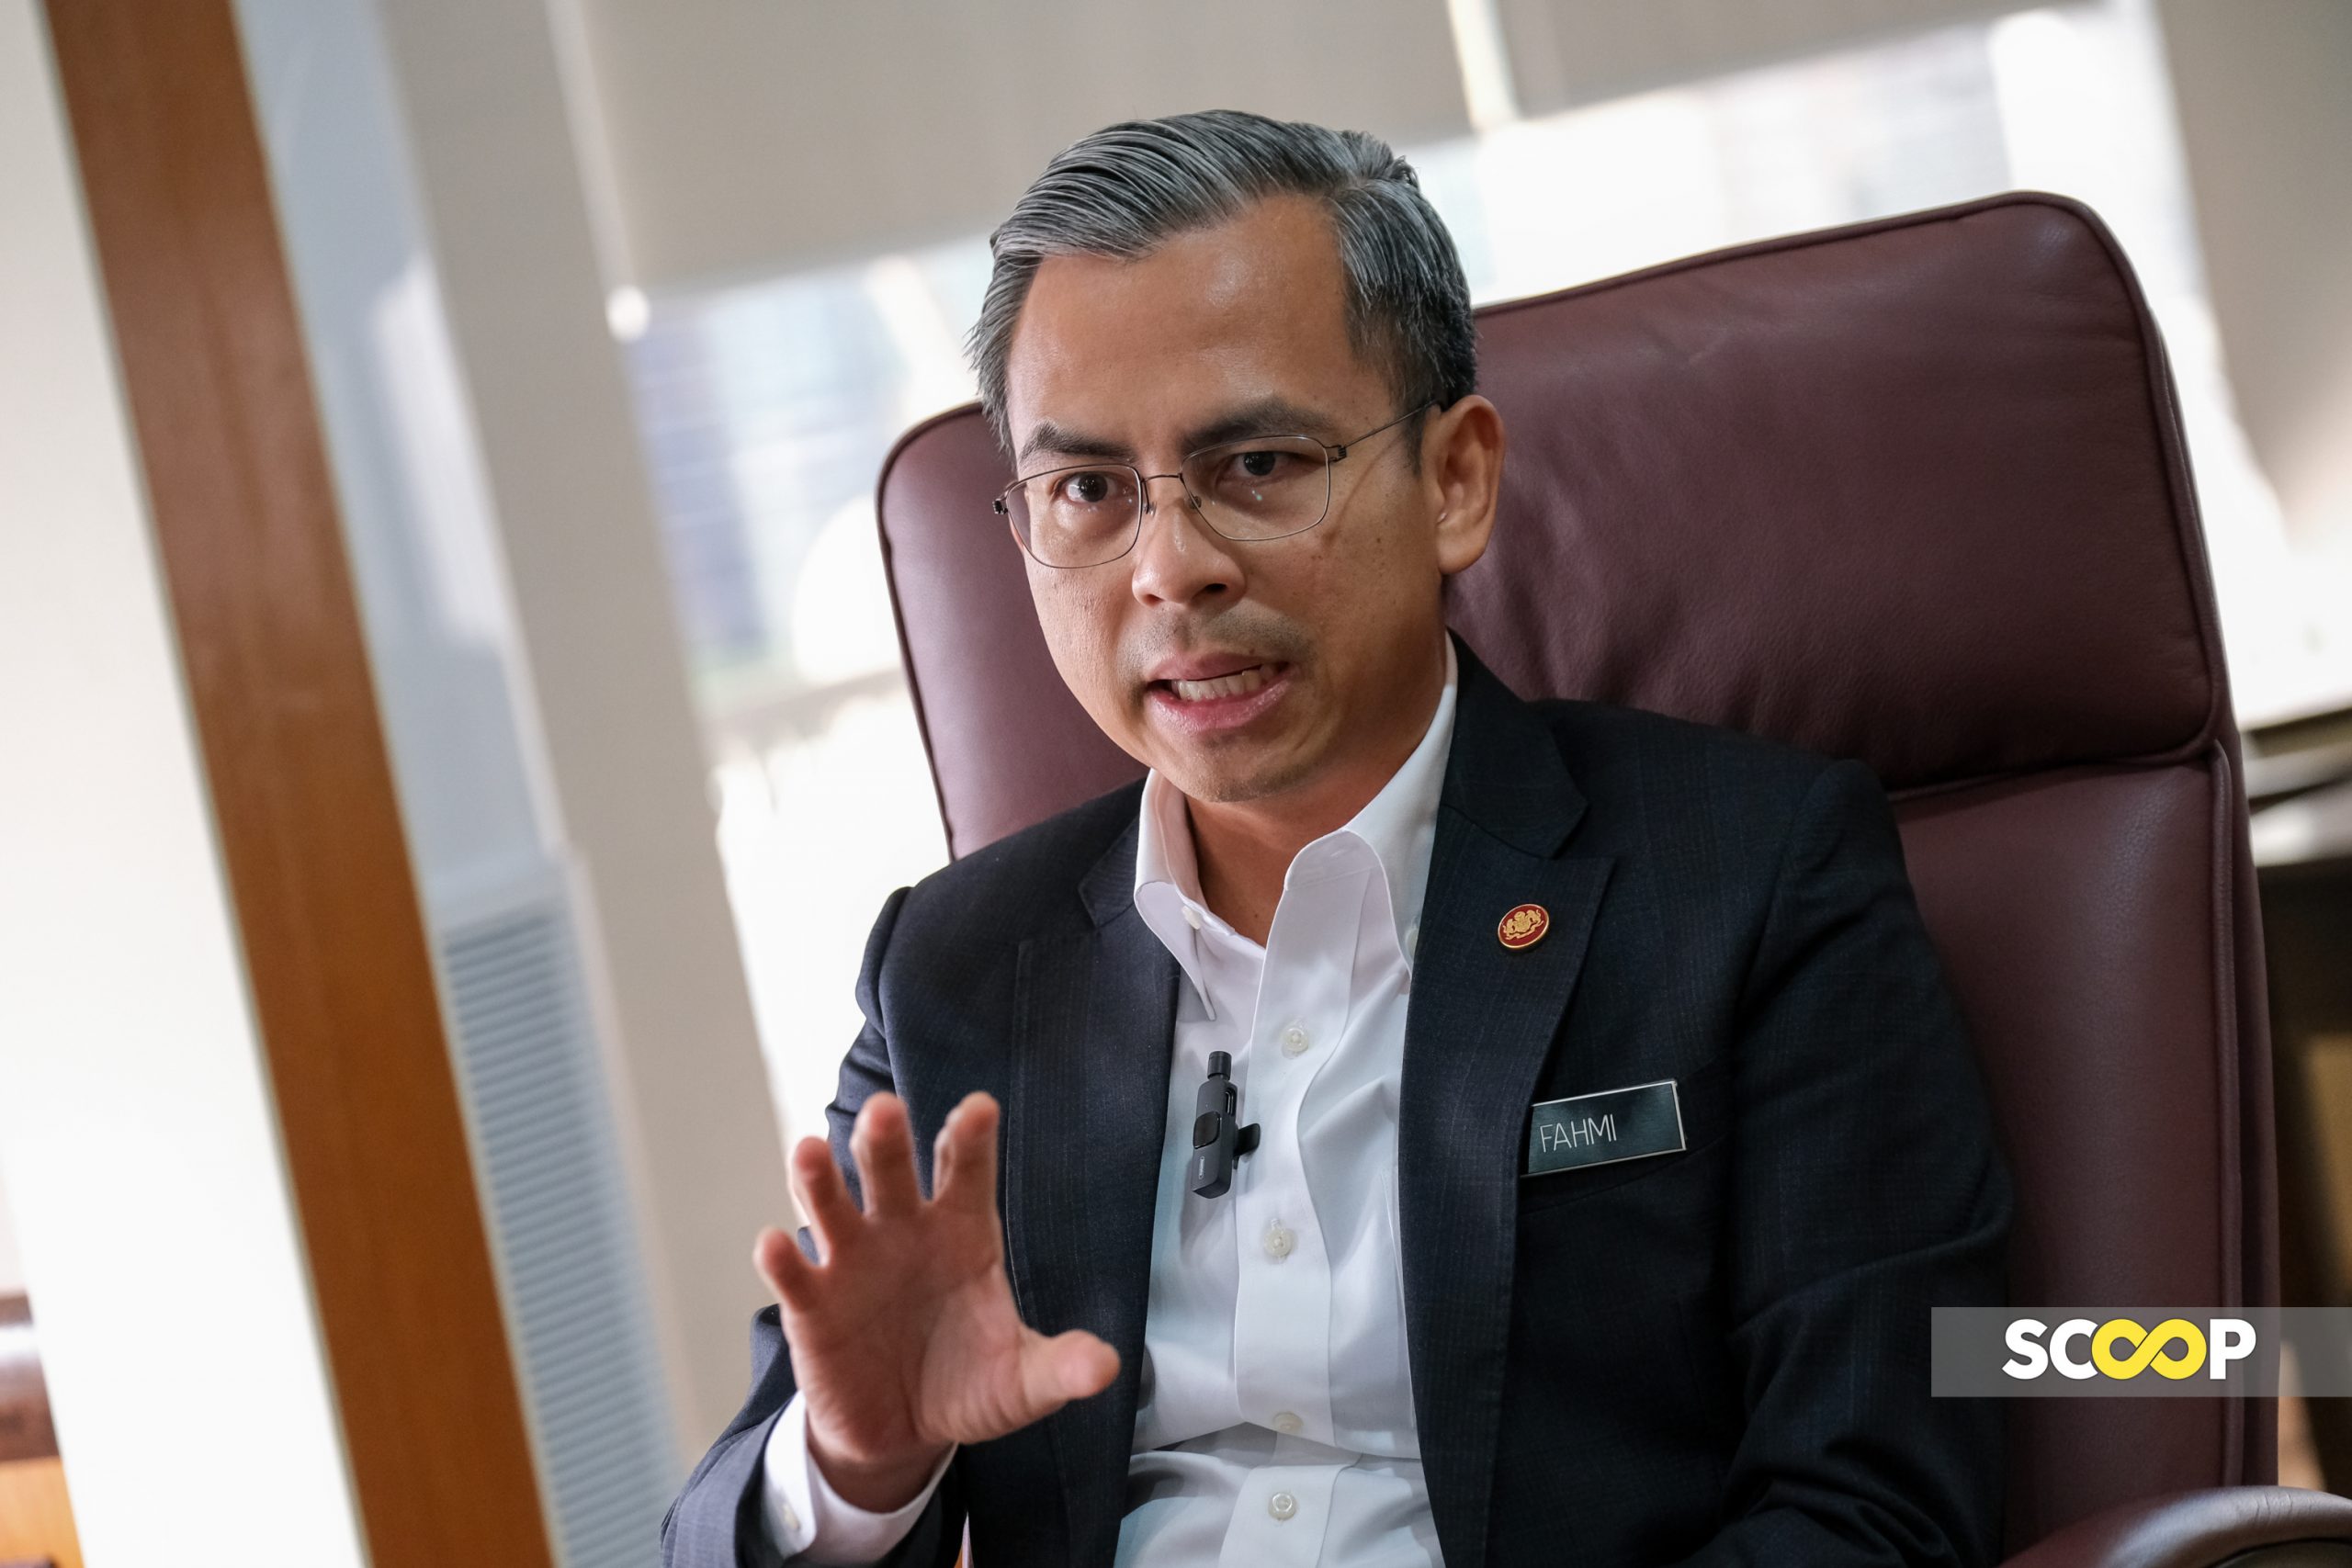 Second 5G network contract not yet awarded to anyone, says Fahmi